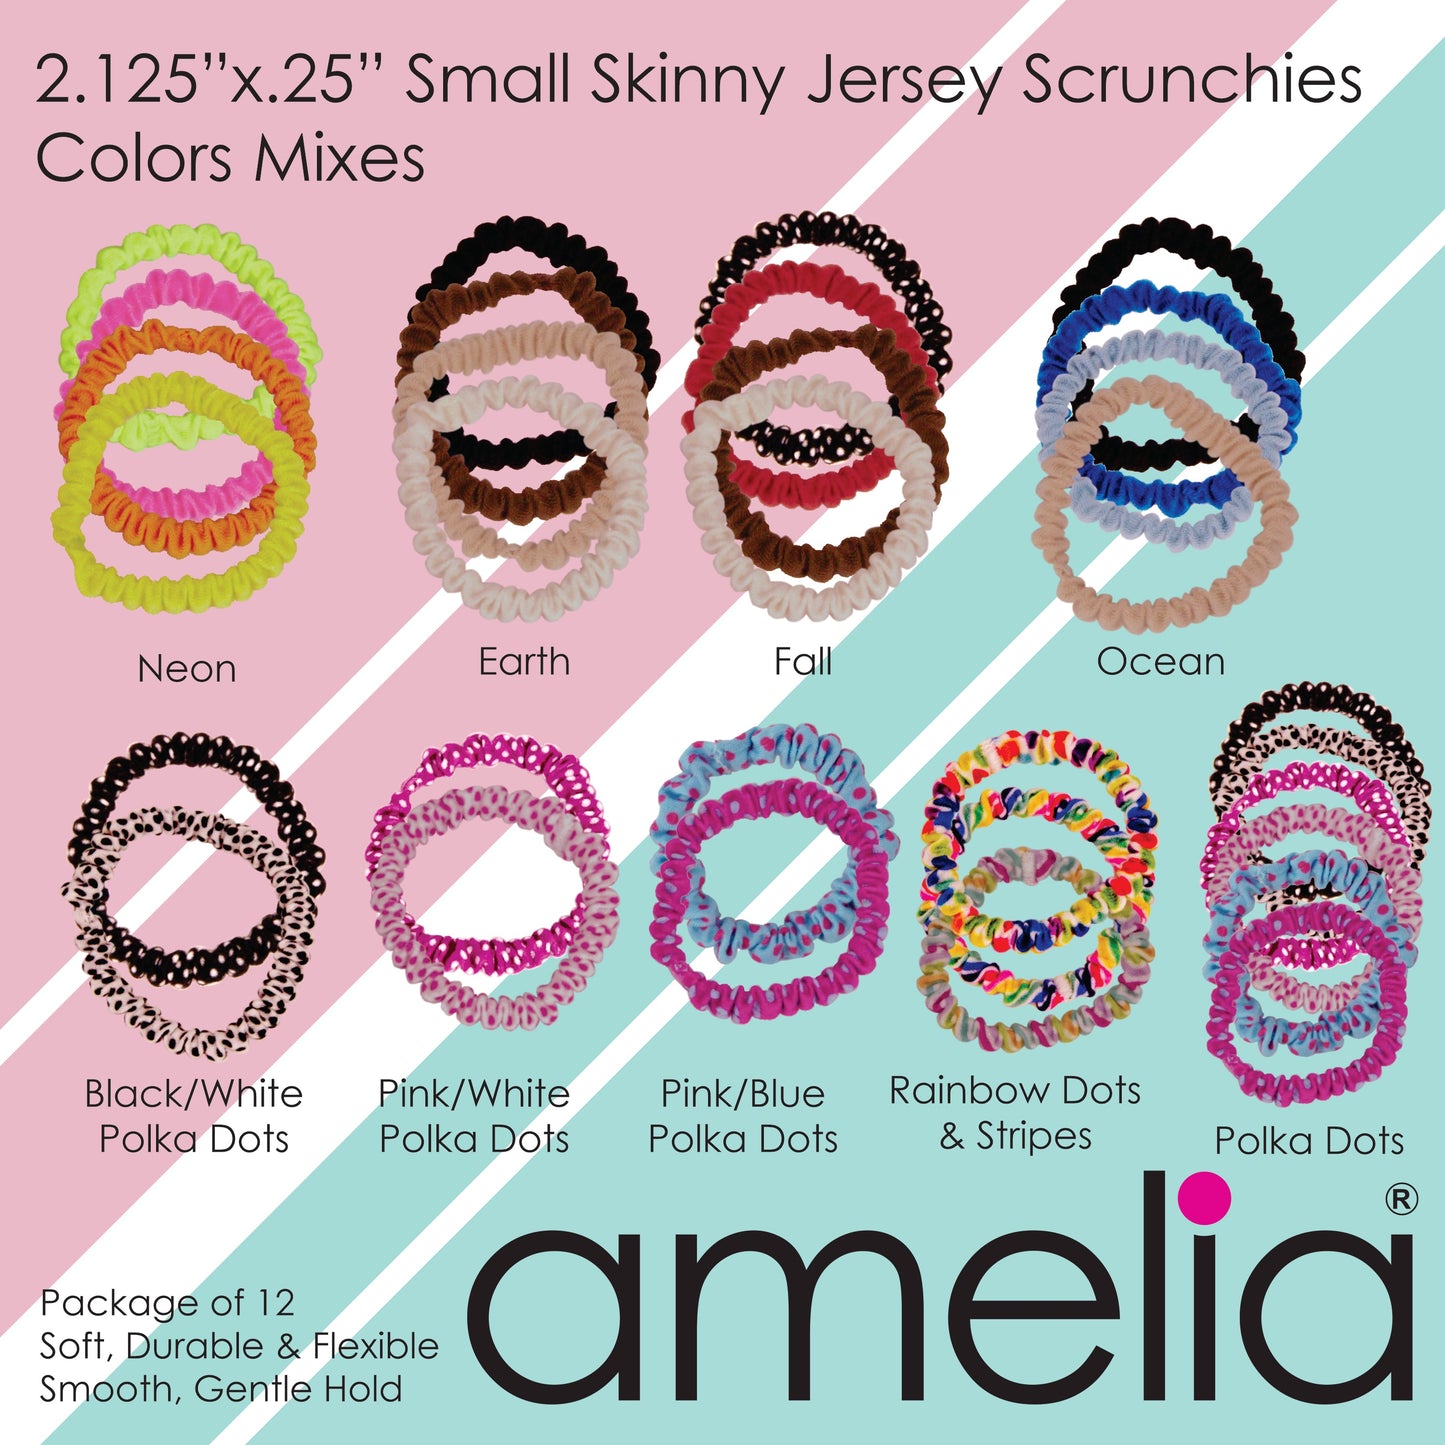 Amelia Beauty, Purple Skinny Jersey Scrunchies, 2.125in Diameter, Gentle on Hair, Strong Hold, No Snag, No Dents or Creases. 12 Pack